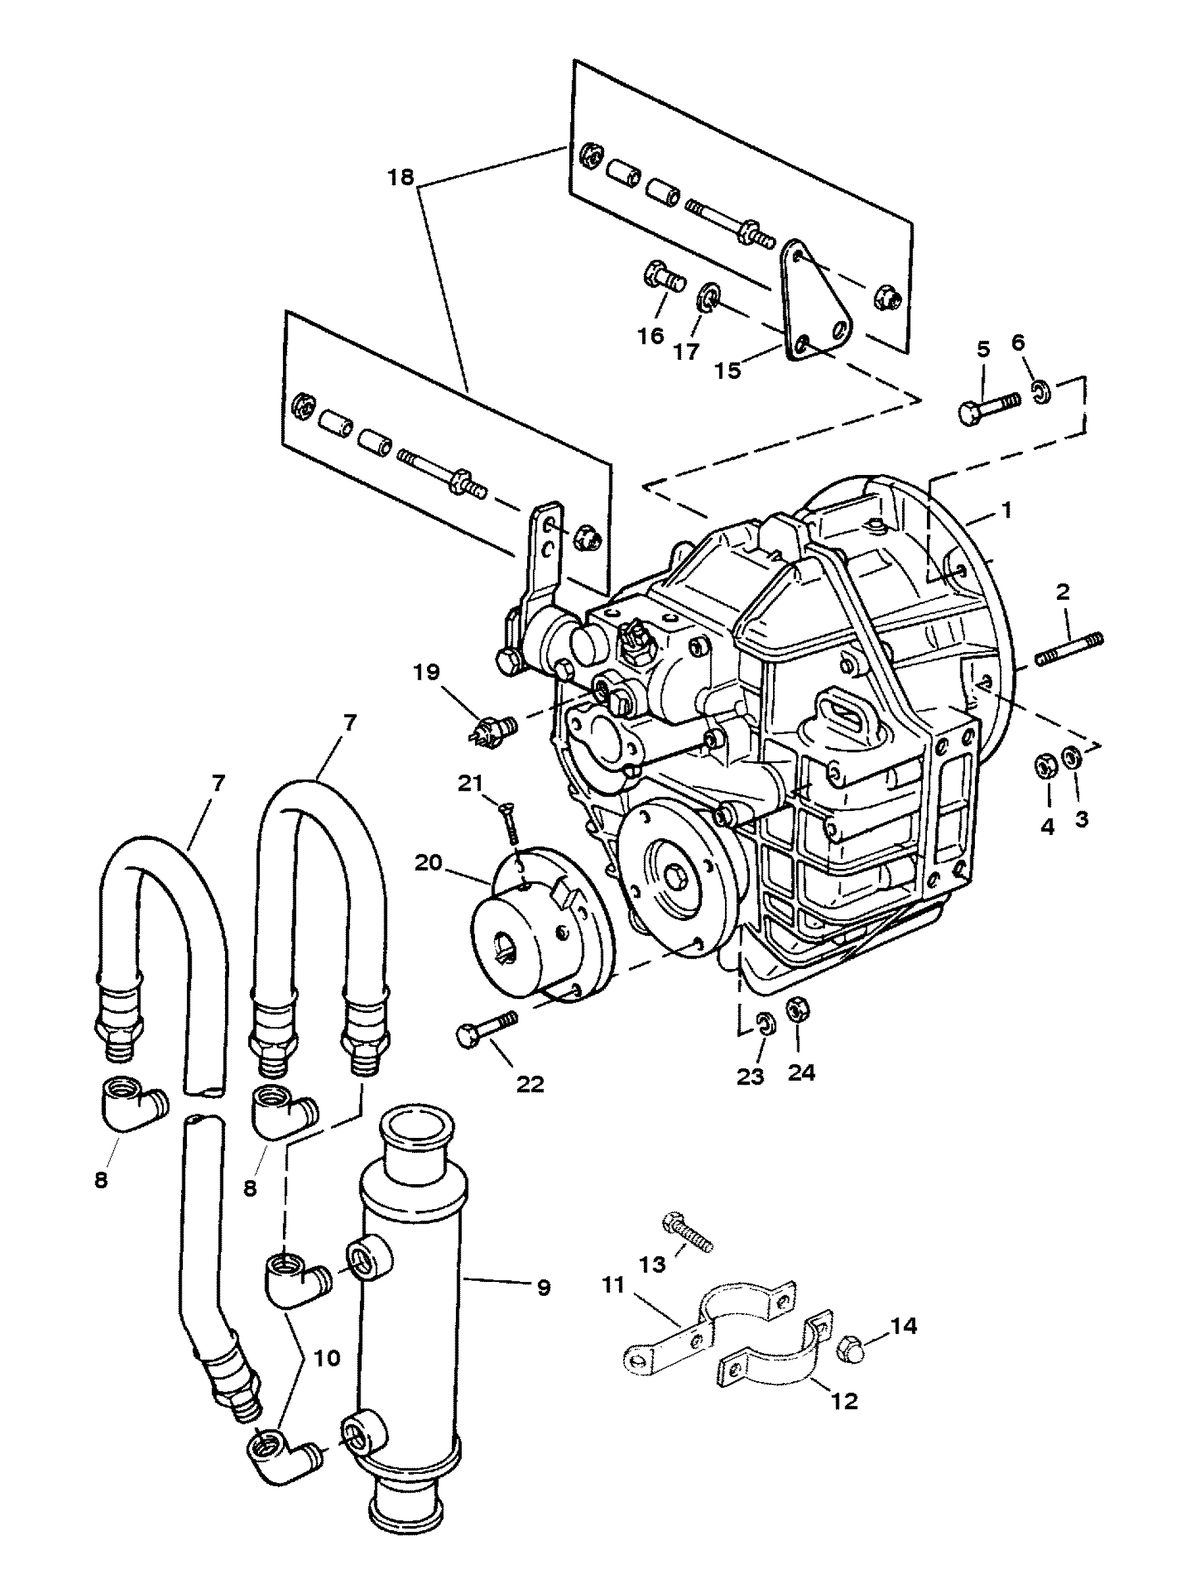 MERCRUISER 5.7L INBOARD ENGINE TRANSMISSION AND RELATED PARTS (HURTH)